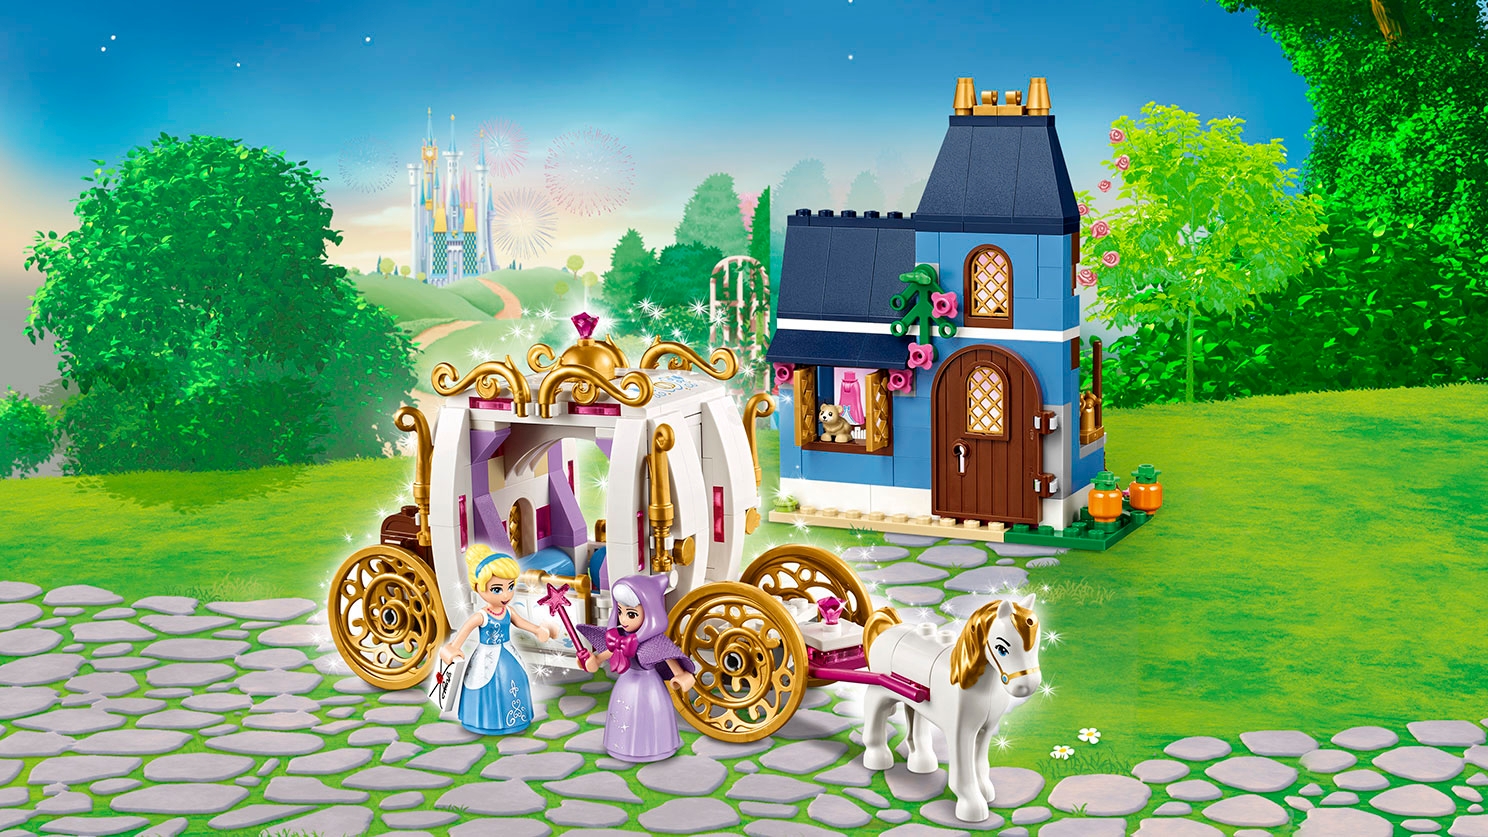 LEGO Disney - 41146 Cinderella's Enchanted Evening - Cinderella has cleaned the house and the Fairy Godmother has a magical horse-drawn carriage and beautiful dress ready for Cinderella so she can go to the ball.